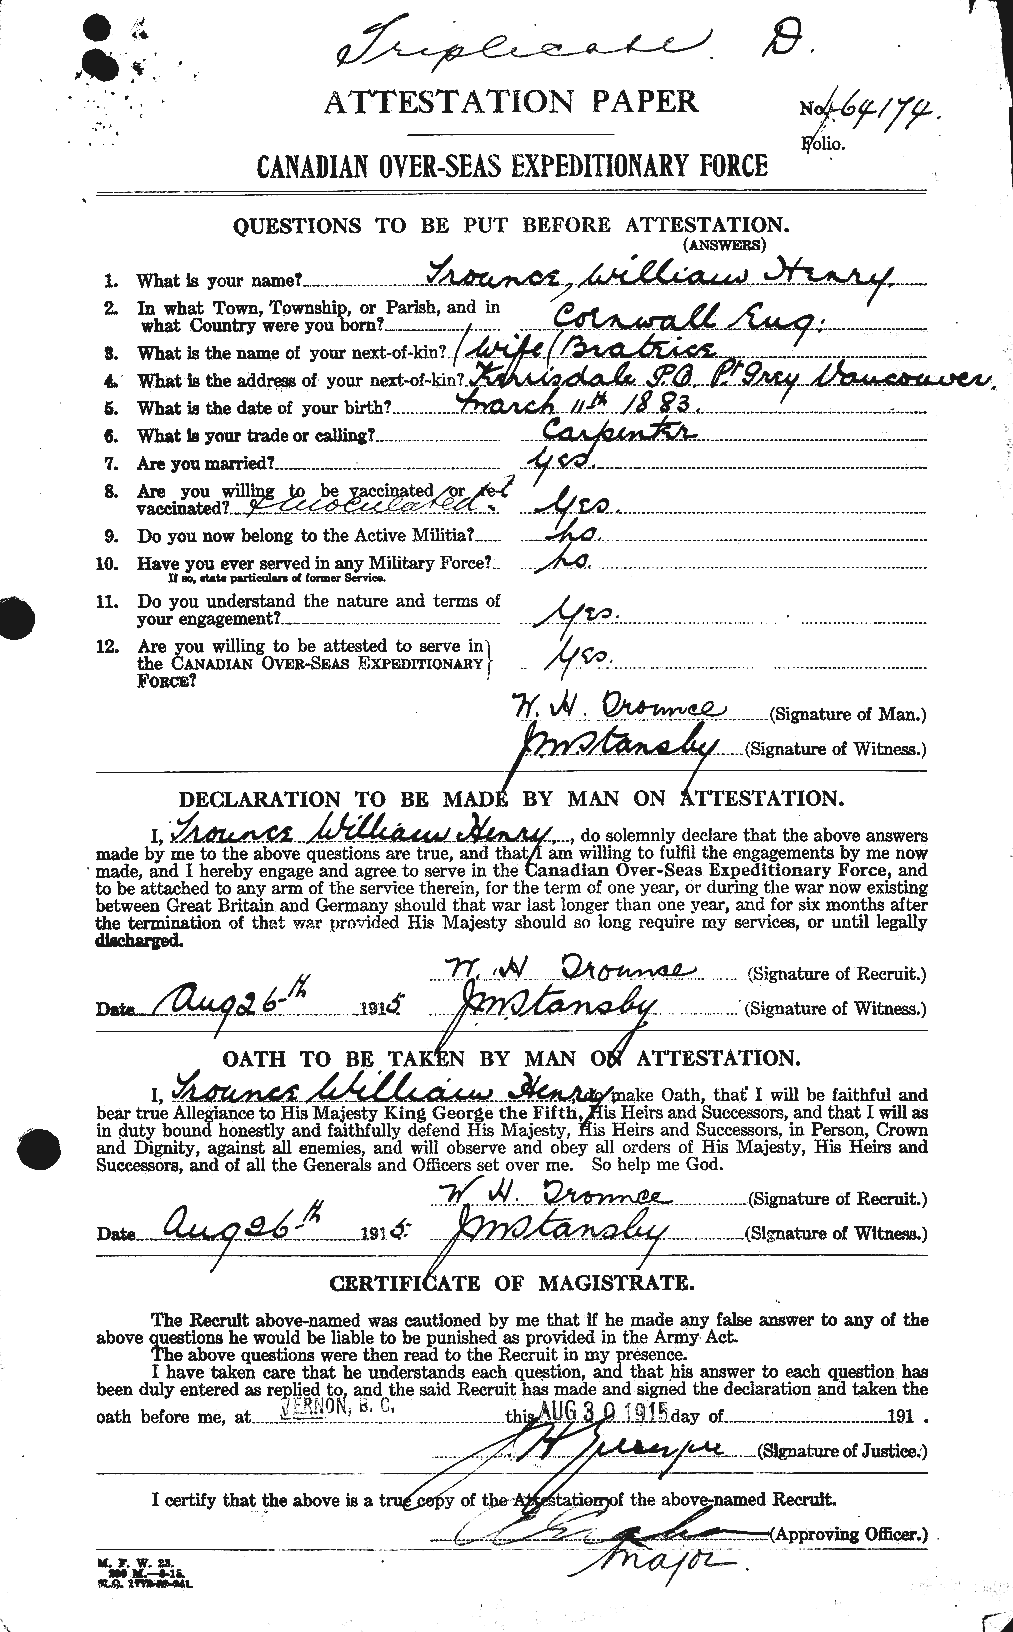 Personnel Records of the First World War - CEF 640455a